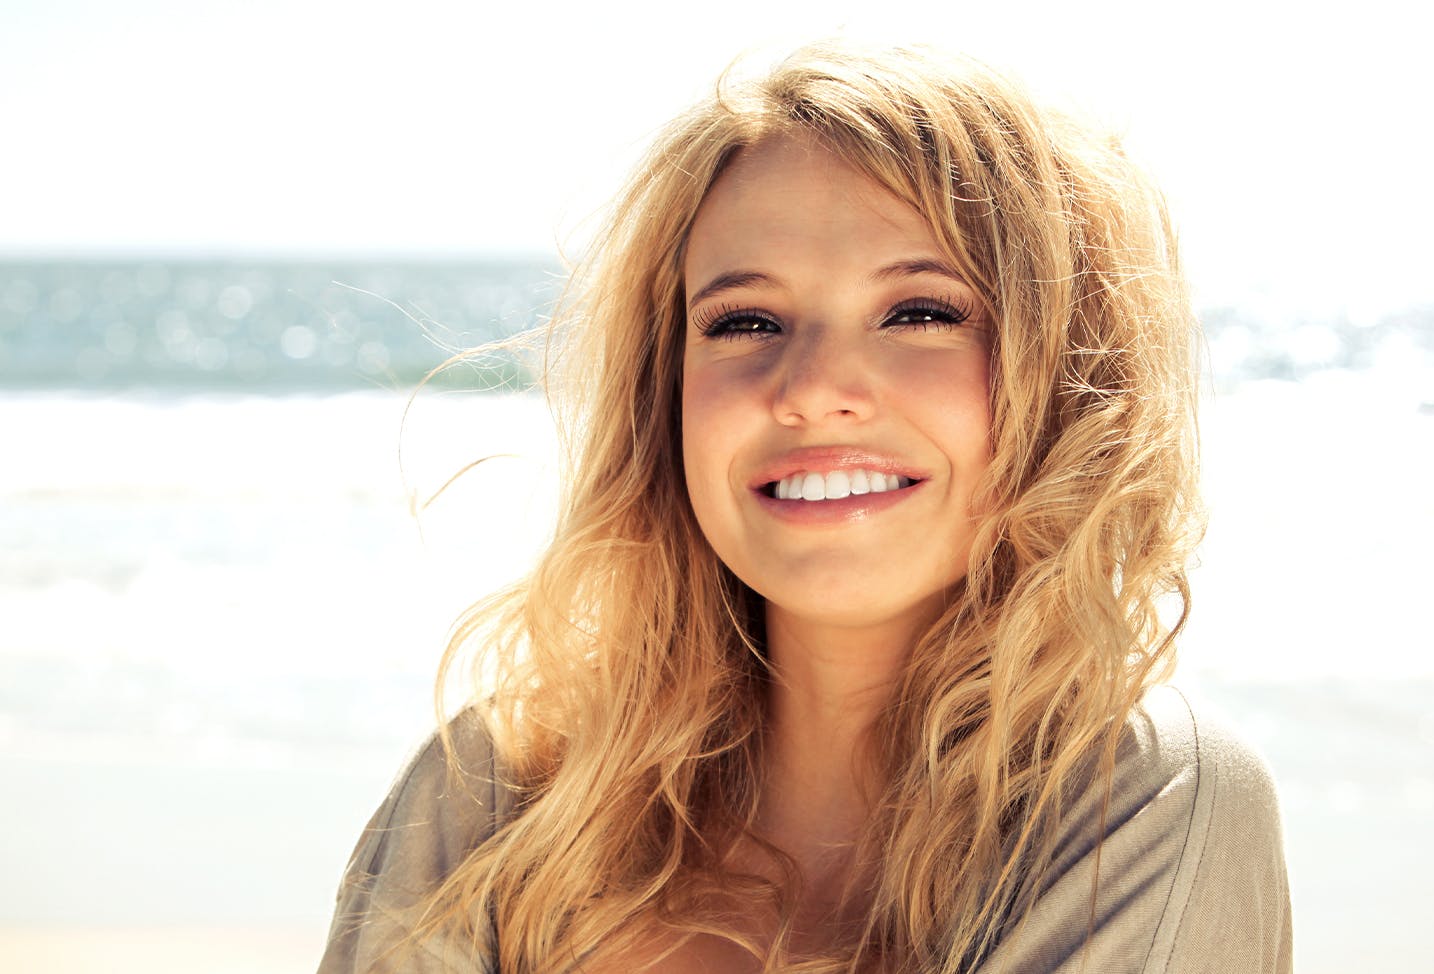 A blonde woman smiling on the beach